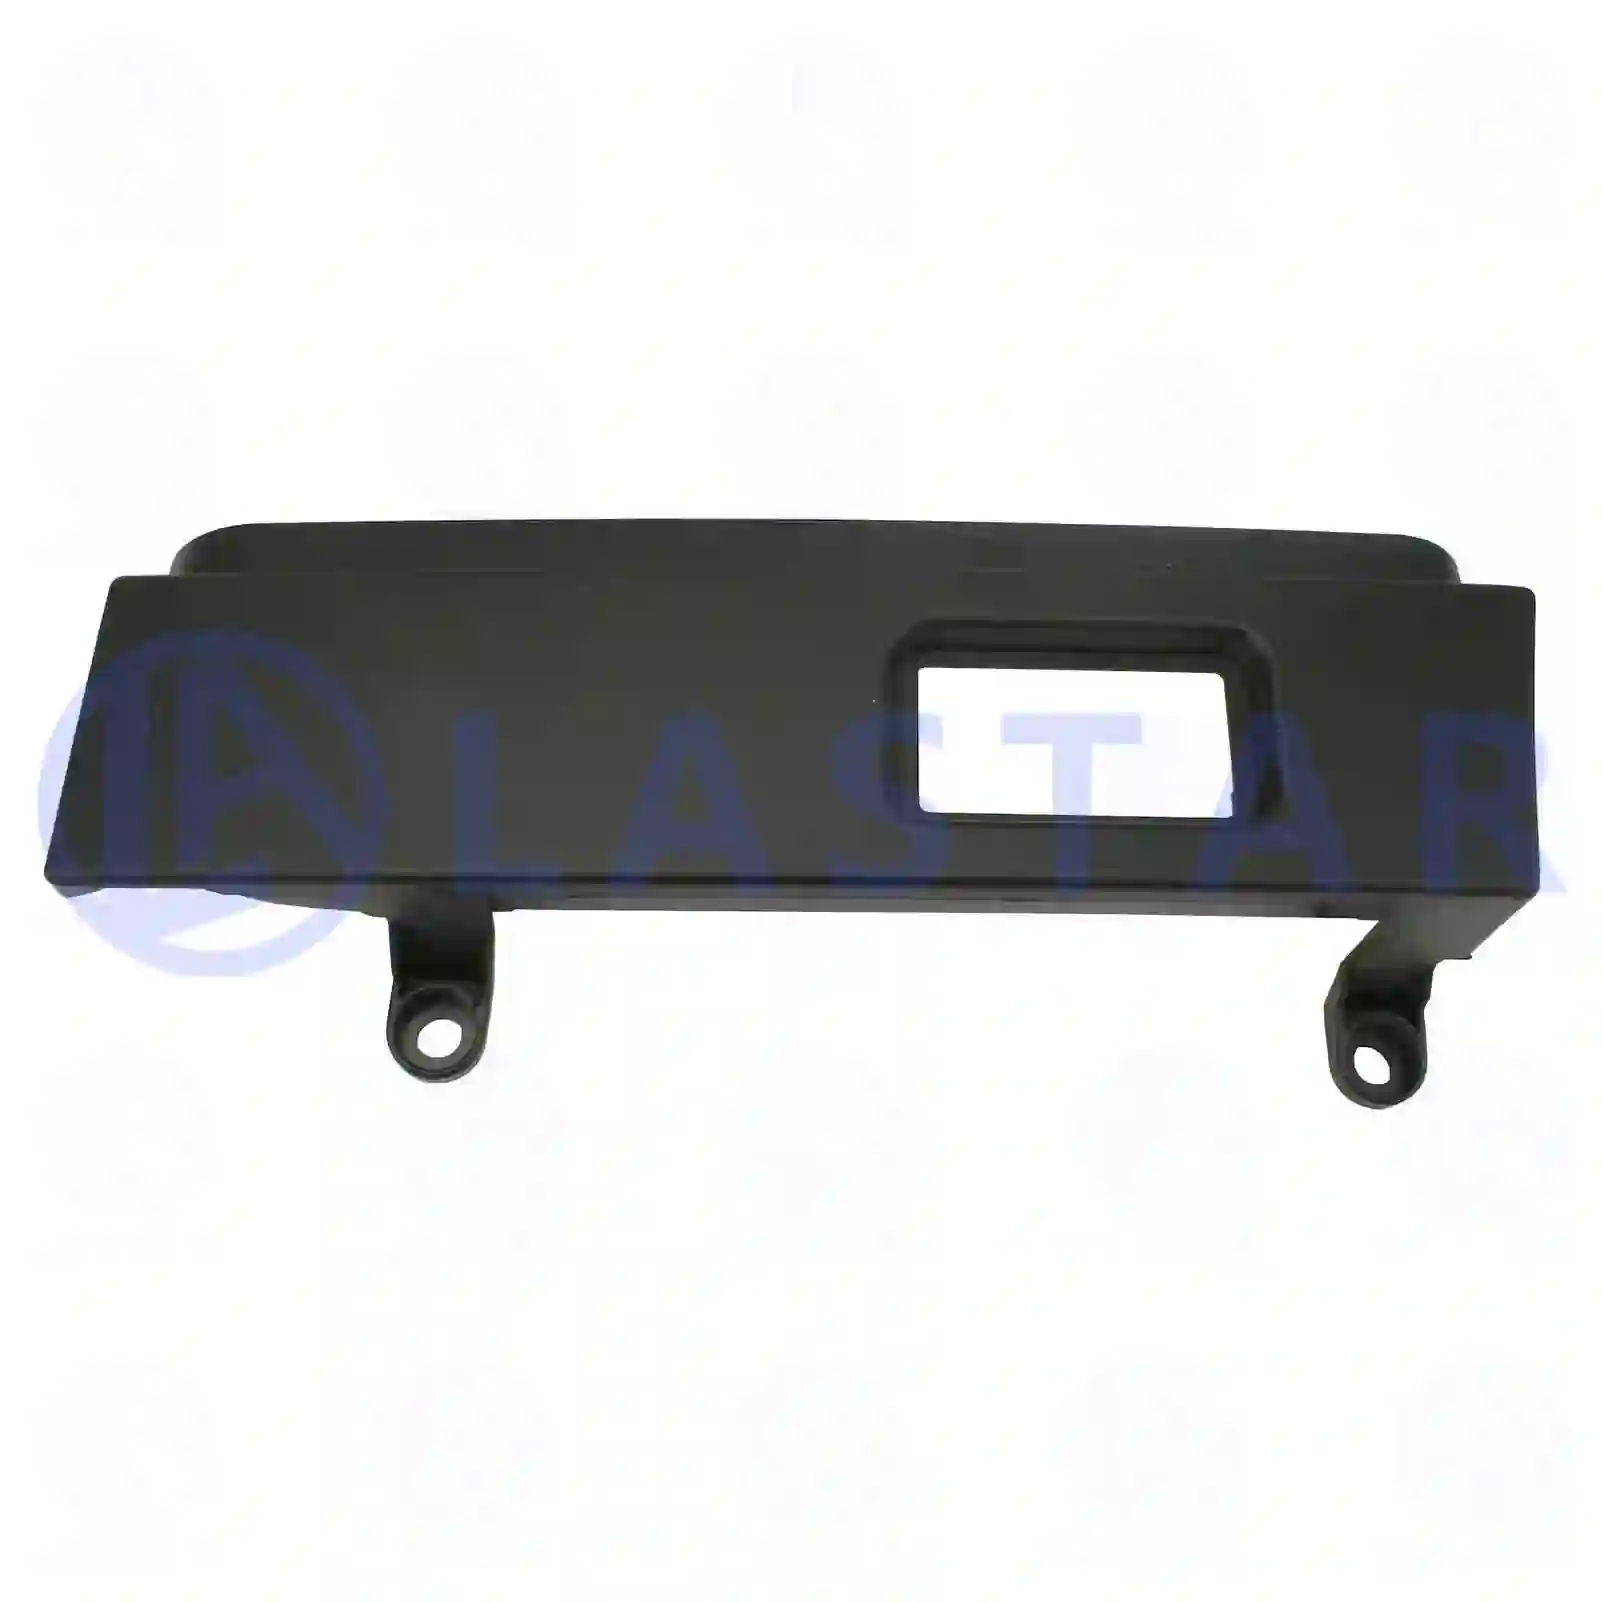 Cover, left, 77721516, 1354593, ZG60461-0008 ||  77721516 Lastar Spare Part | Truck Spare Parts, Auotomotive Spare Parts Cover, left, 77721516, 1354593, ZG60461-0008 ||  77721516 Lastar Spare Part | Truck Spare Parts, Auotomotive Spare Parts